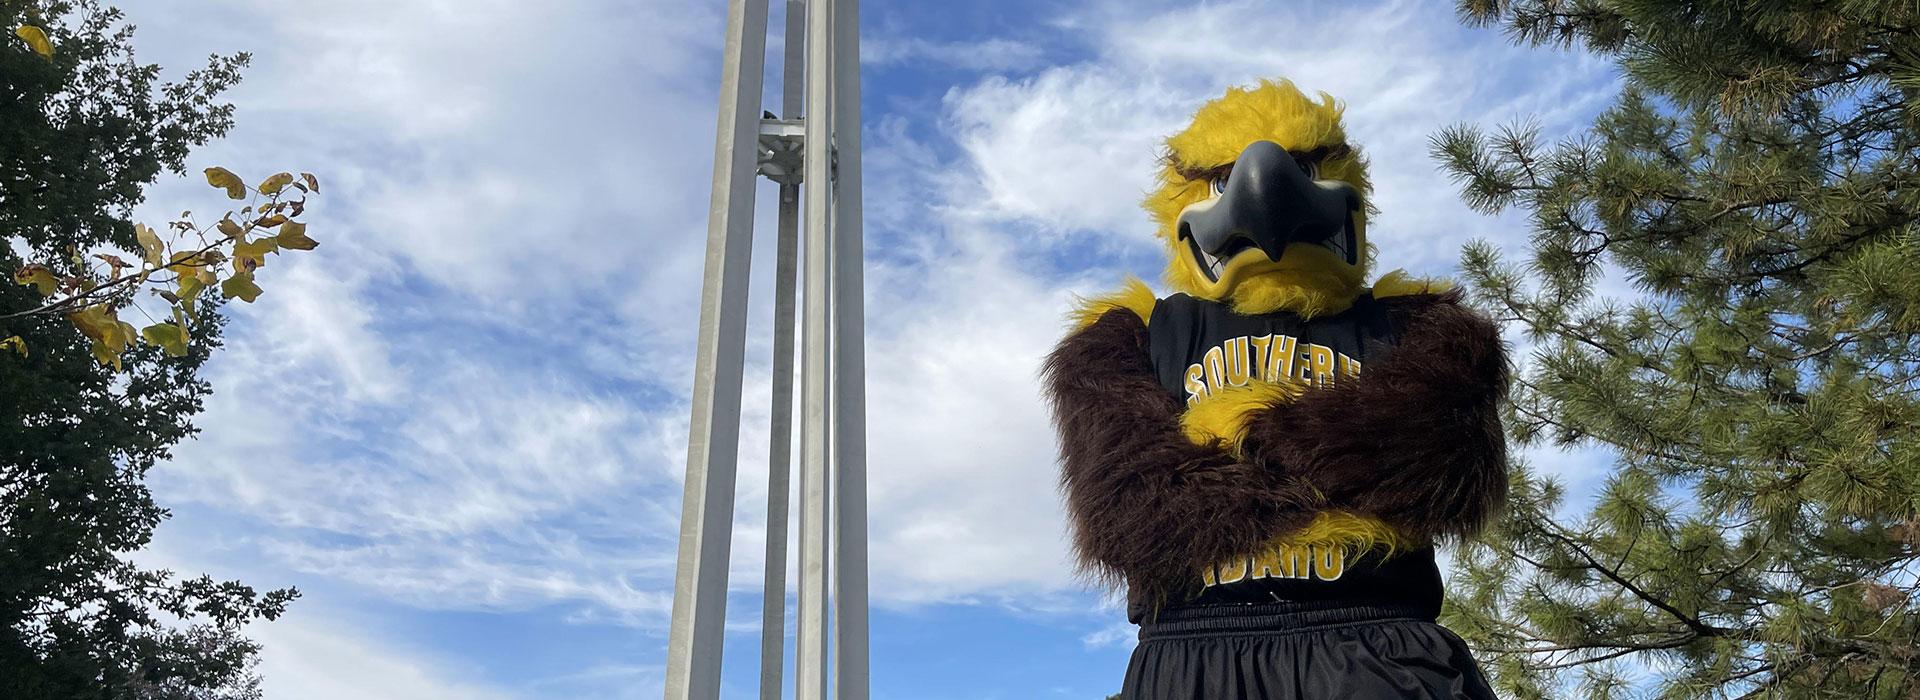 Gilbert, the CSI golden eagle mascot, faces the camera with their arms crossed.